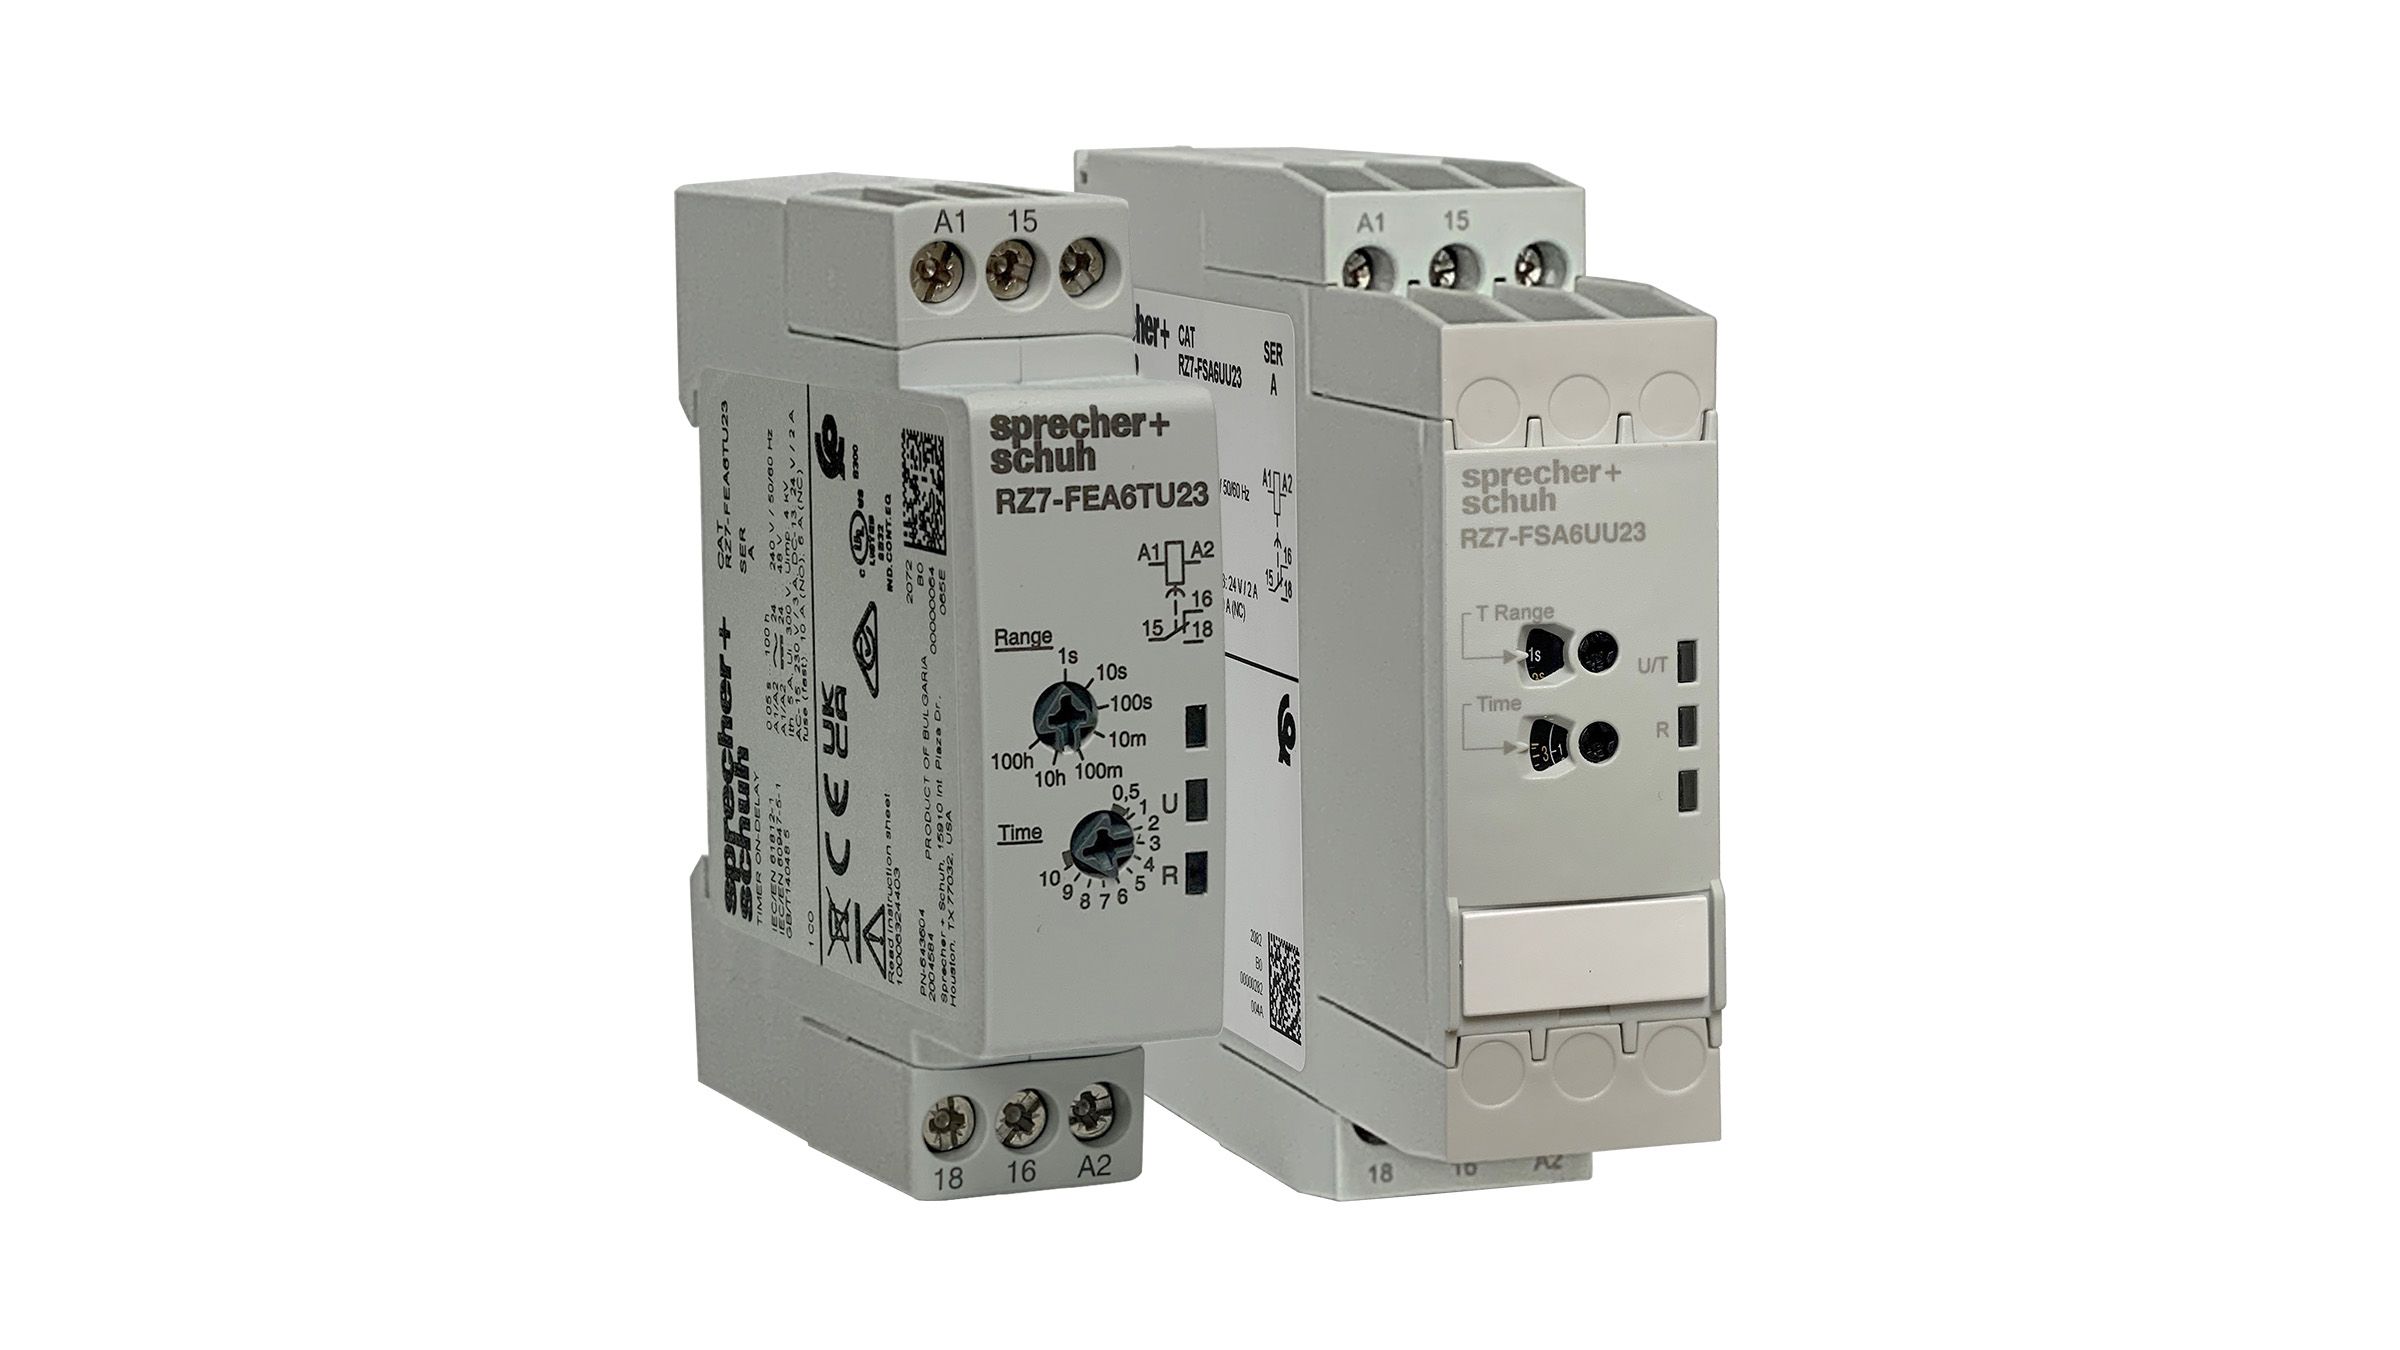 Timing relays with a wide variety of delay options, time ranges and output functions, including a hazardous location relay.